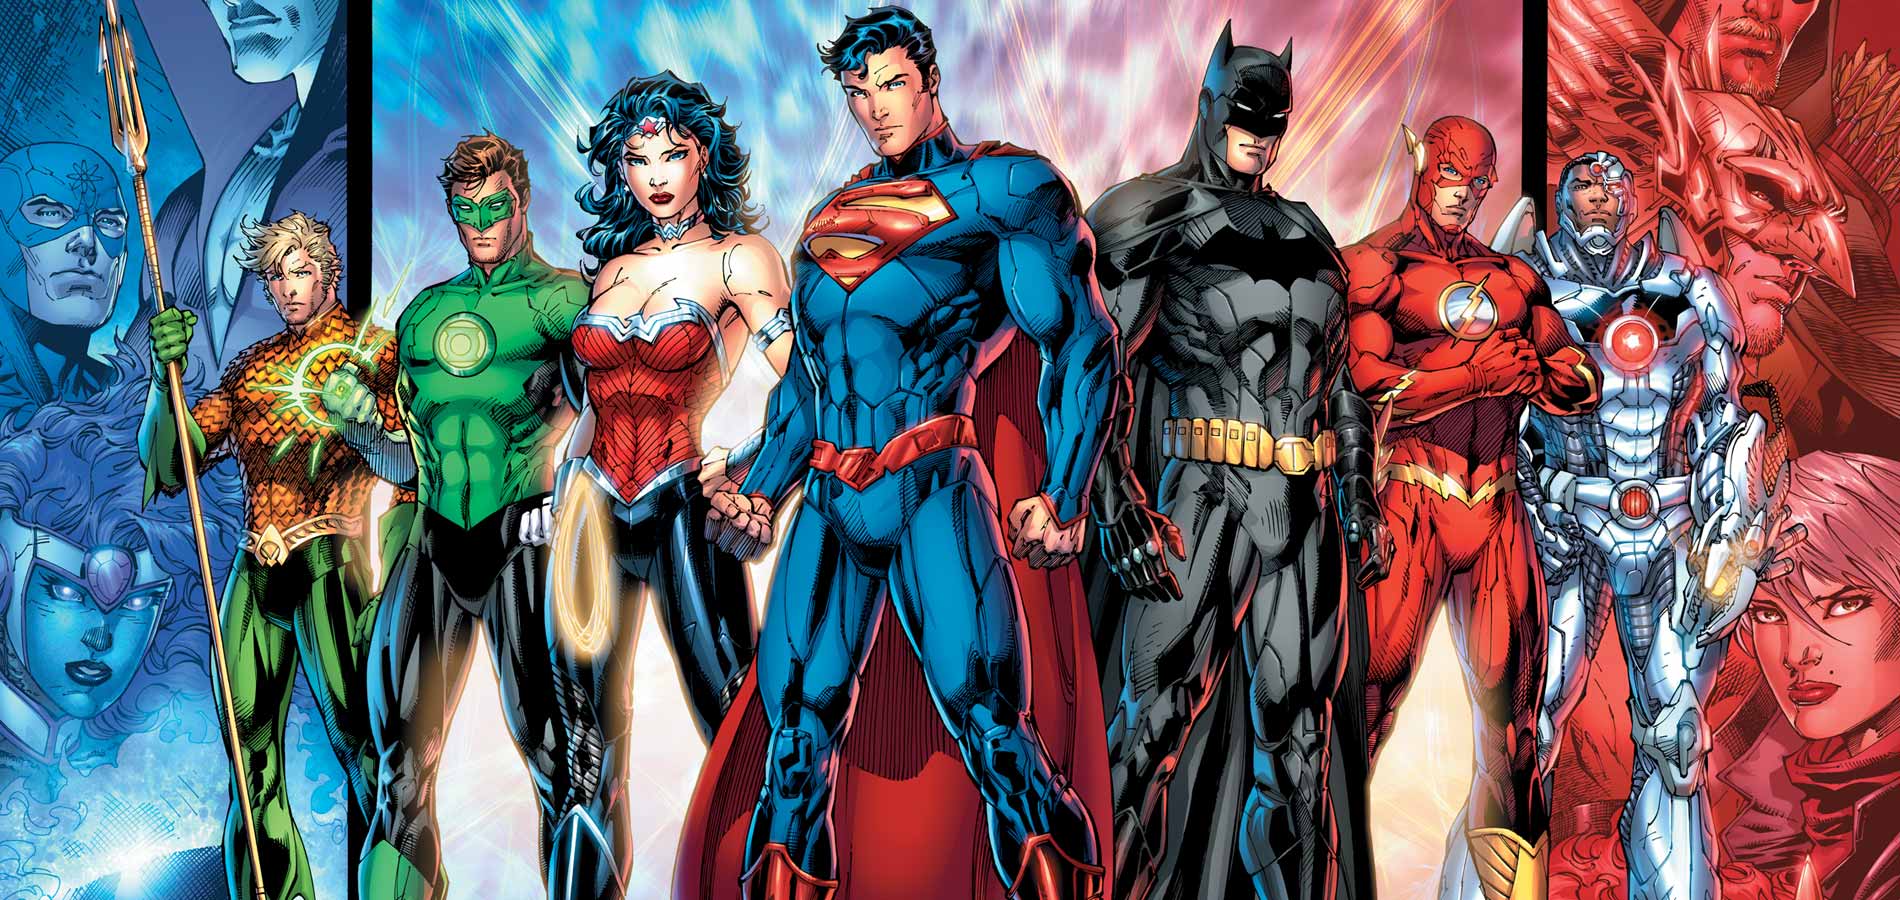 Justice League movie: Batman vs Superman director Zack Snyder to helm  superhero team-up film | The Independent | The Independent